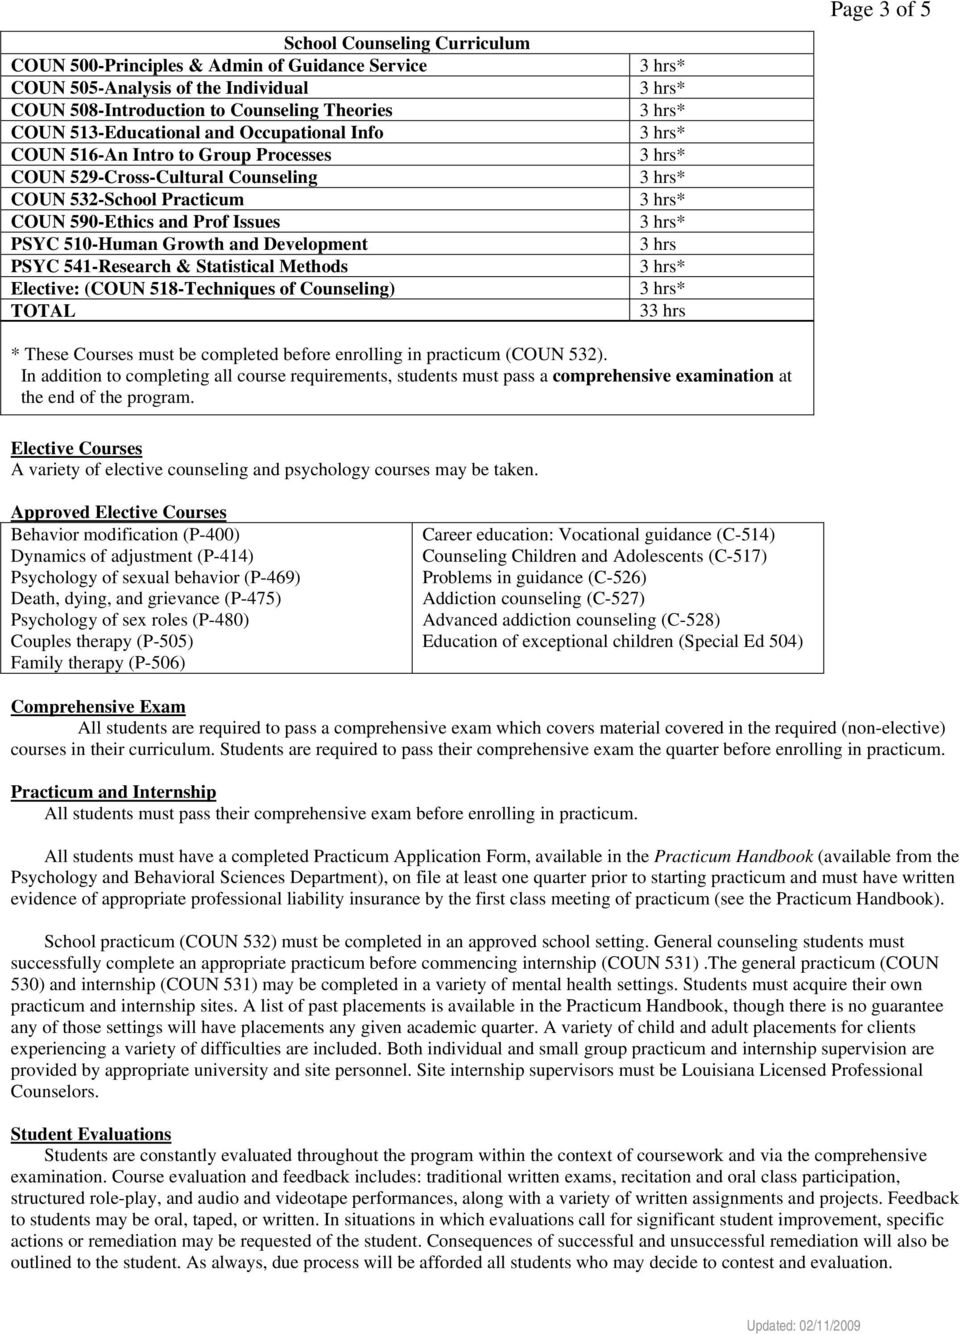 Statistical Methods Elective: (COUN 518-Techniques of Counseling) TOTAL 3 hrs 33 hrs Page 3 of 5 * These Courses must be completed before enrolling in practicum (COUN 532).